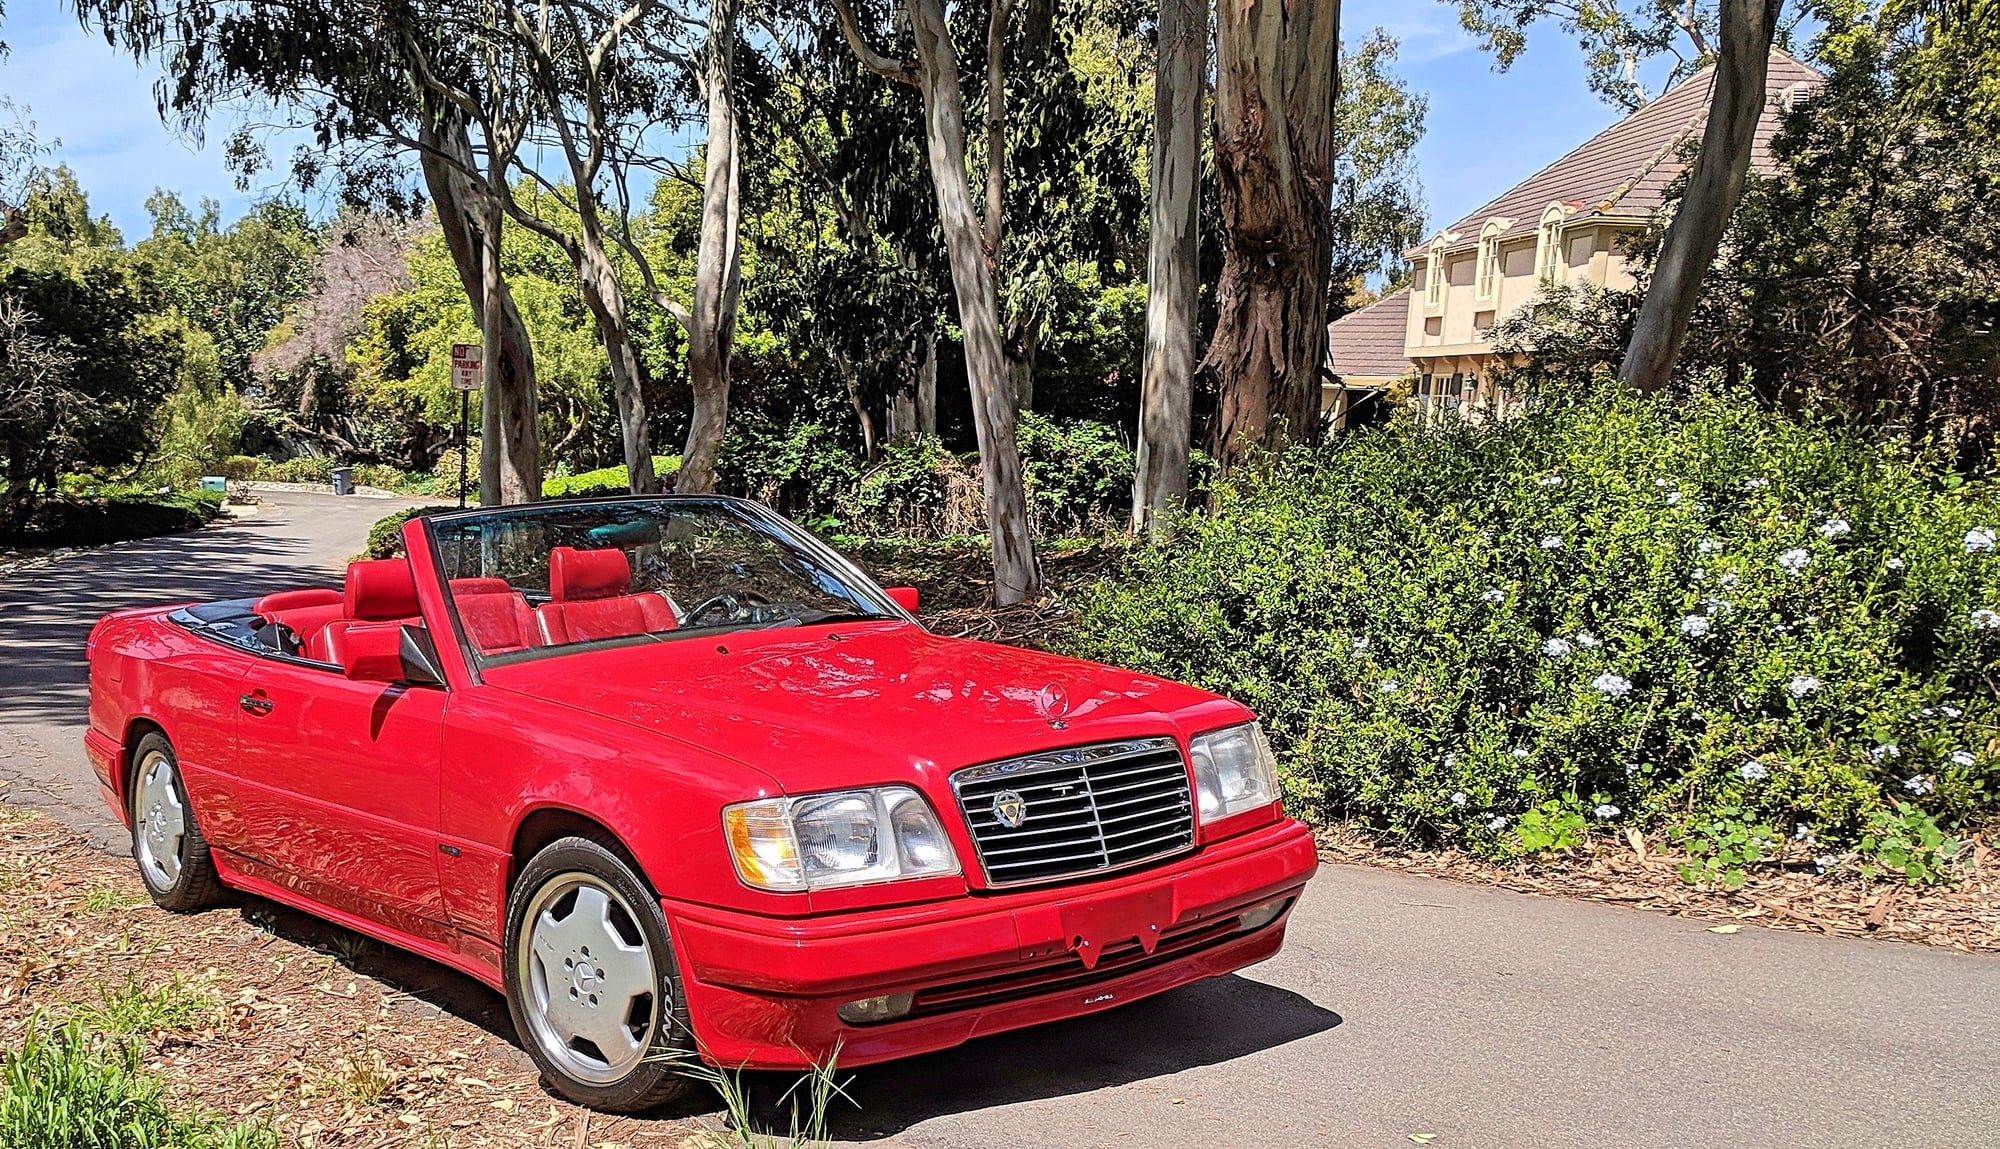 1994 Mercedes-Benz E320 - 1994 Mercedes 320CE Sportline/AMG Cabriolet - Used - VIN WDB1240661C063388 - 74,500 Miles - 6 cyl - 2WD - Automatic - Convertible - Red - Los Angeles, CA 90278, United States